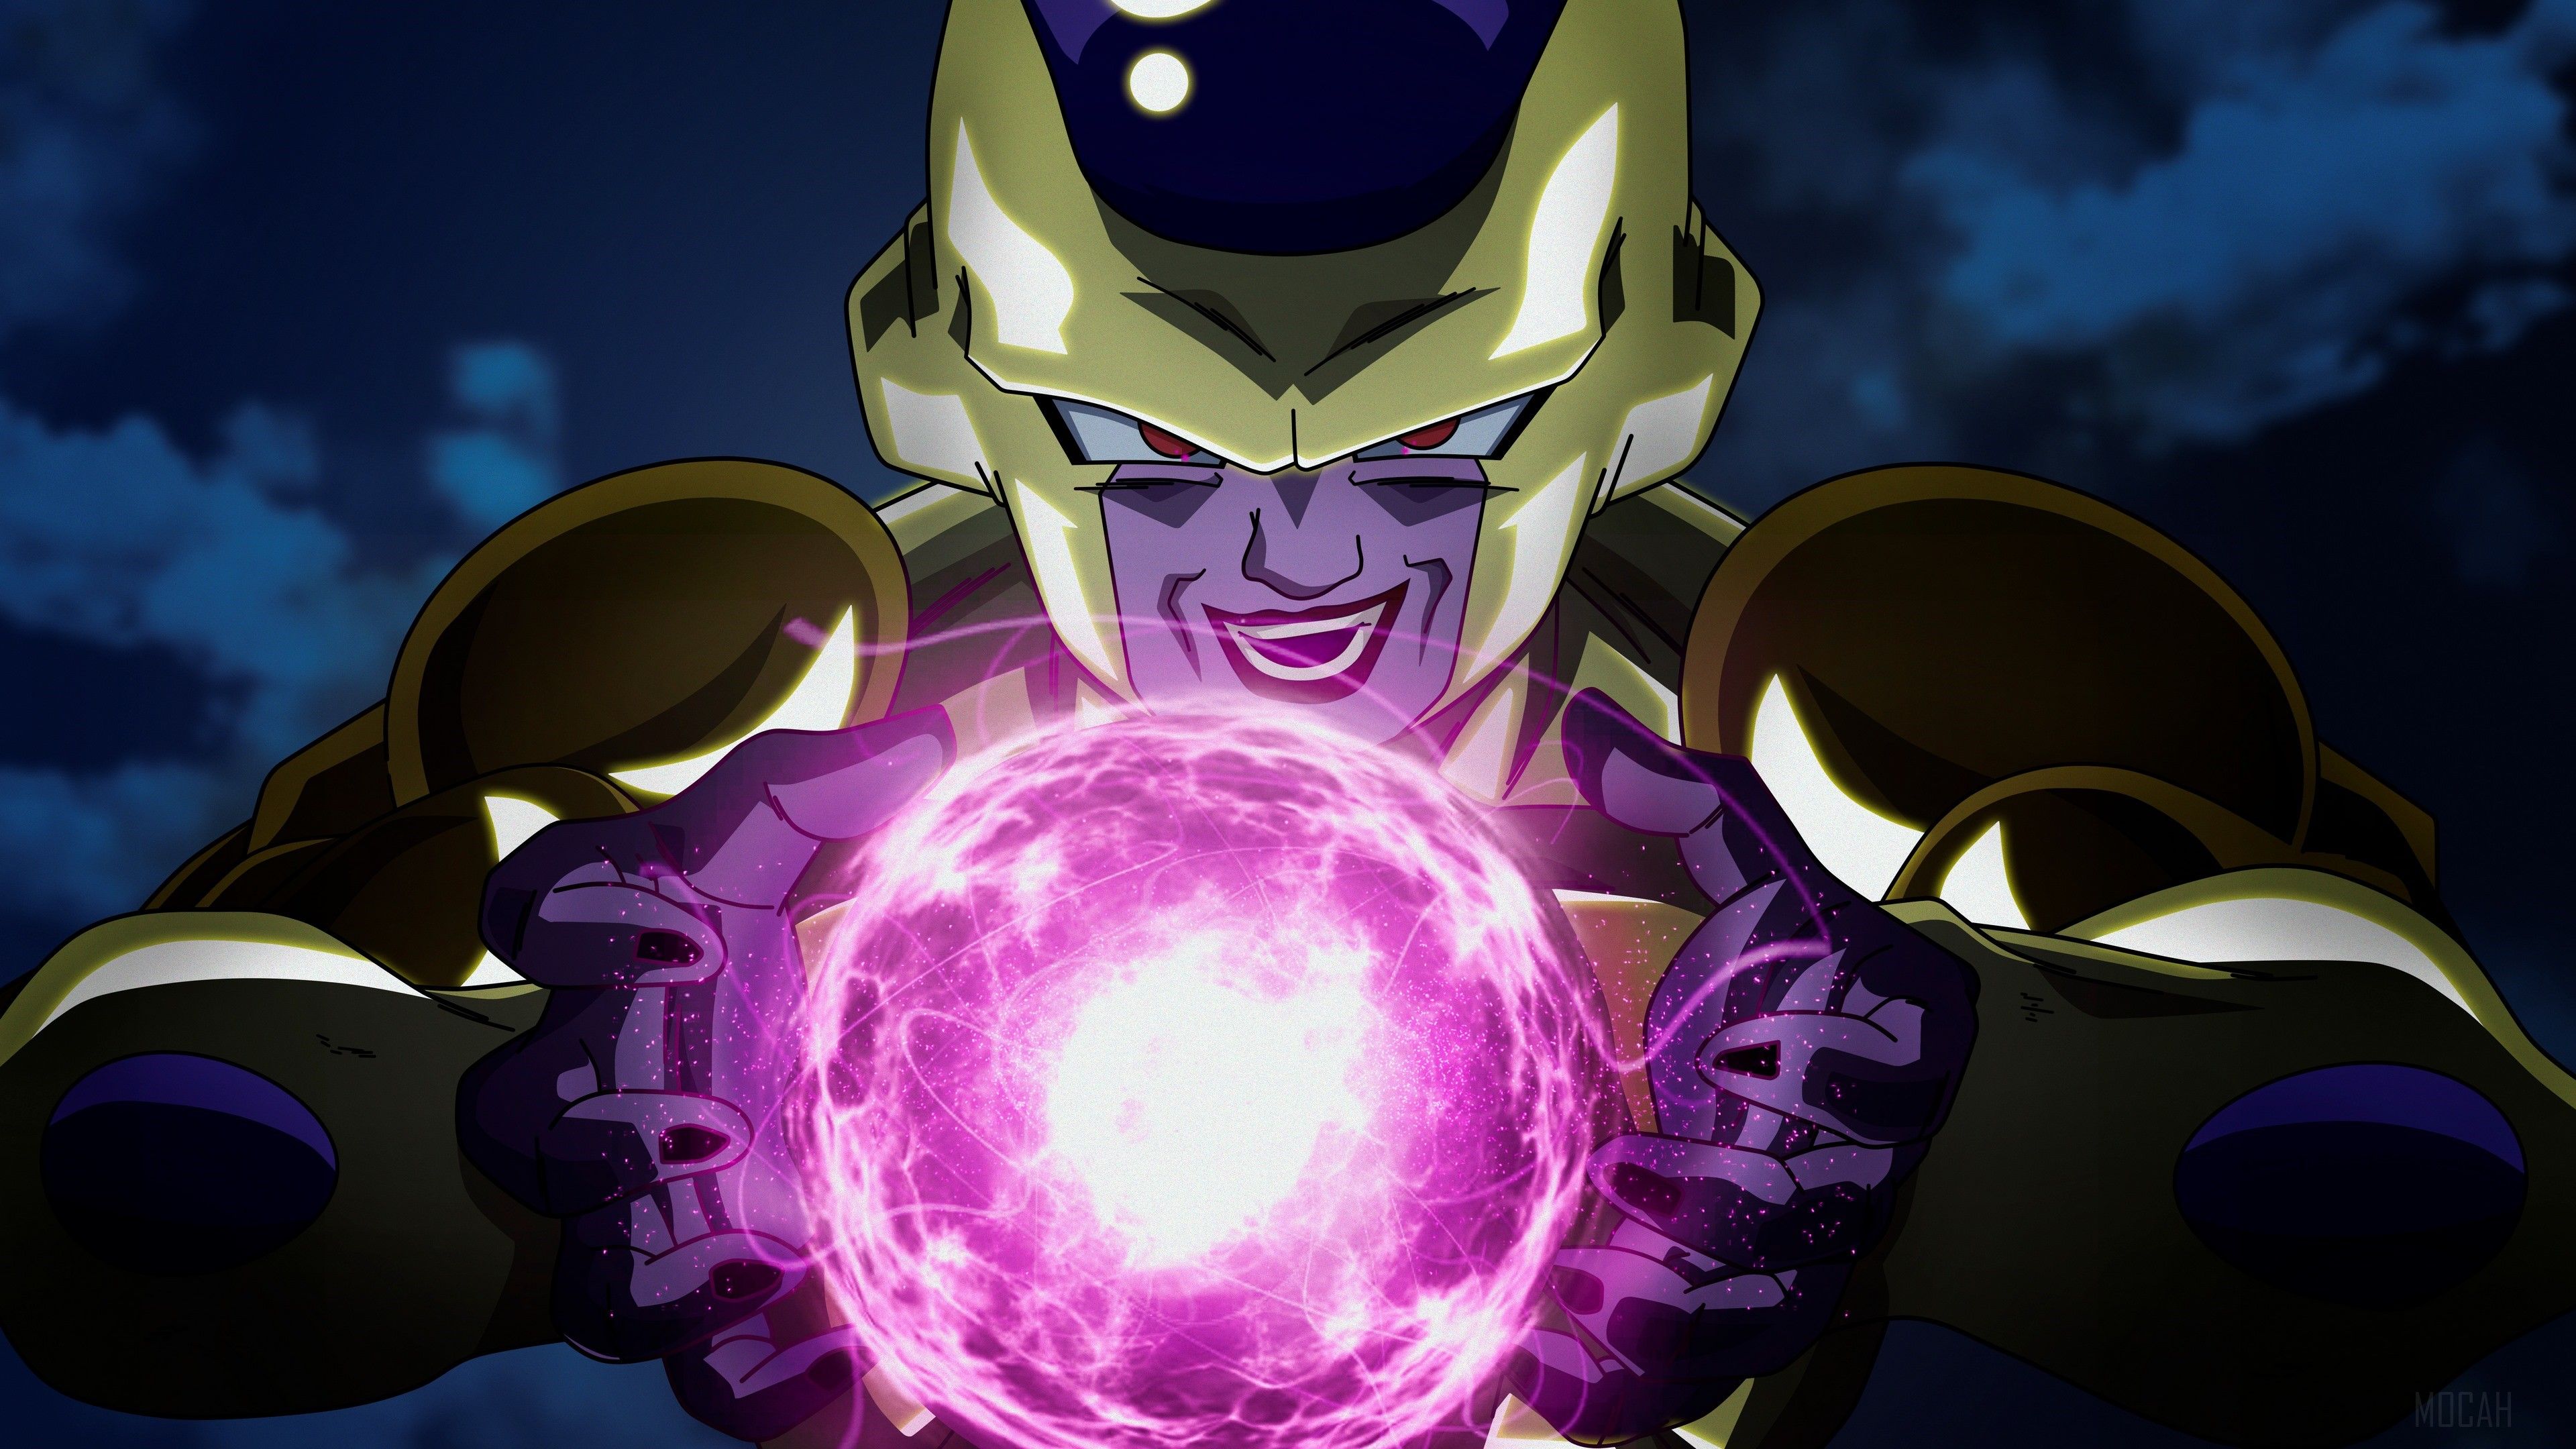 Golden Frieza» 1080P, 2k, 4k HD wallpapers, backgrounds free download |  Rare Gallery